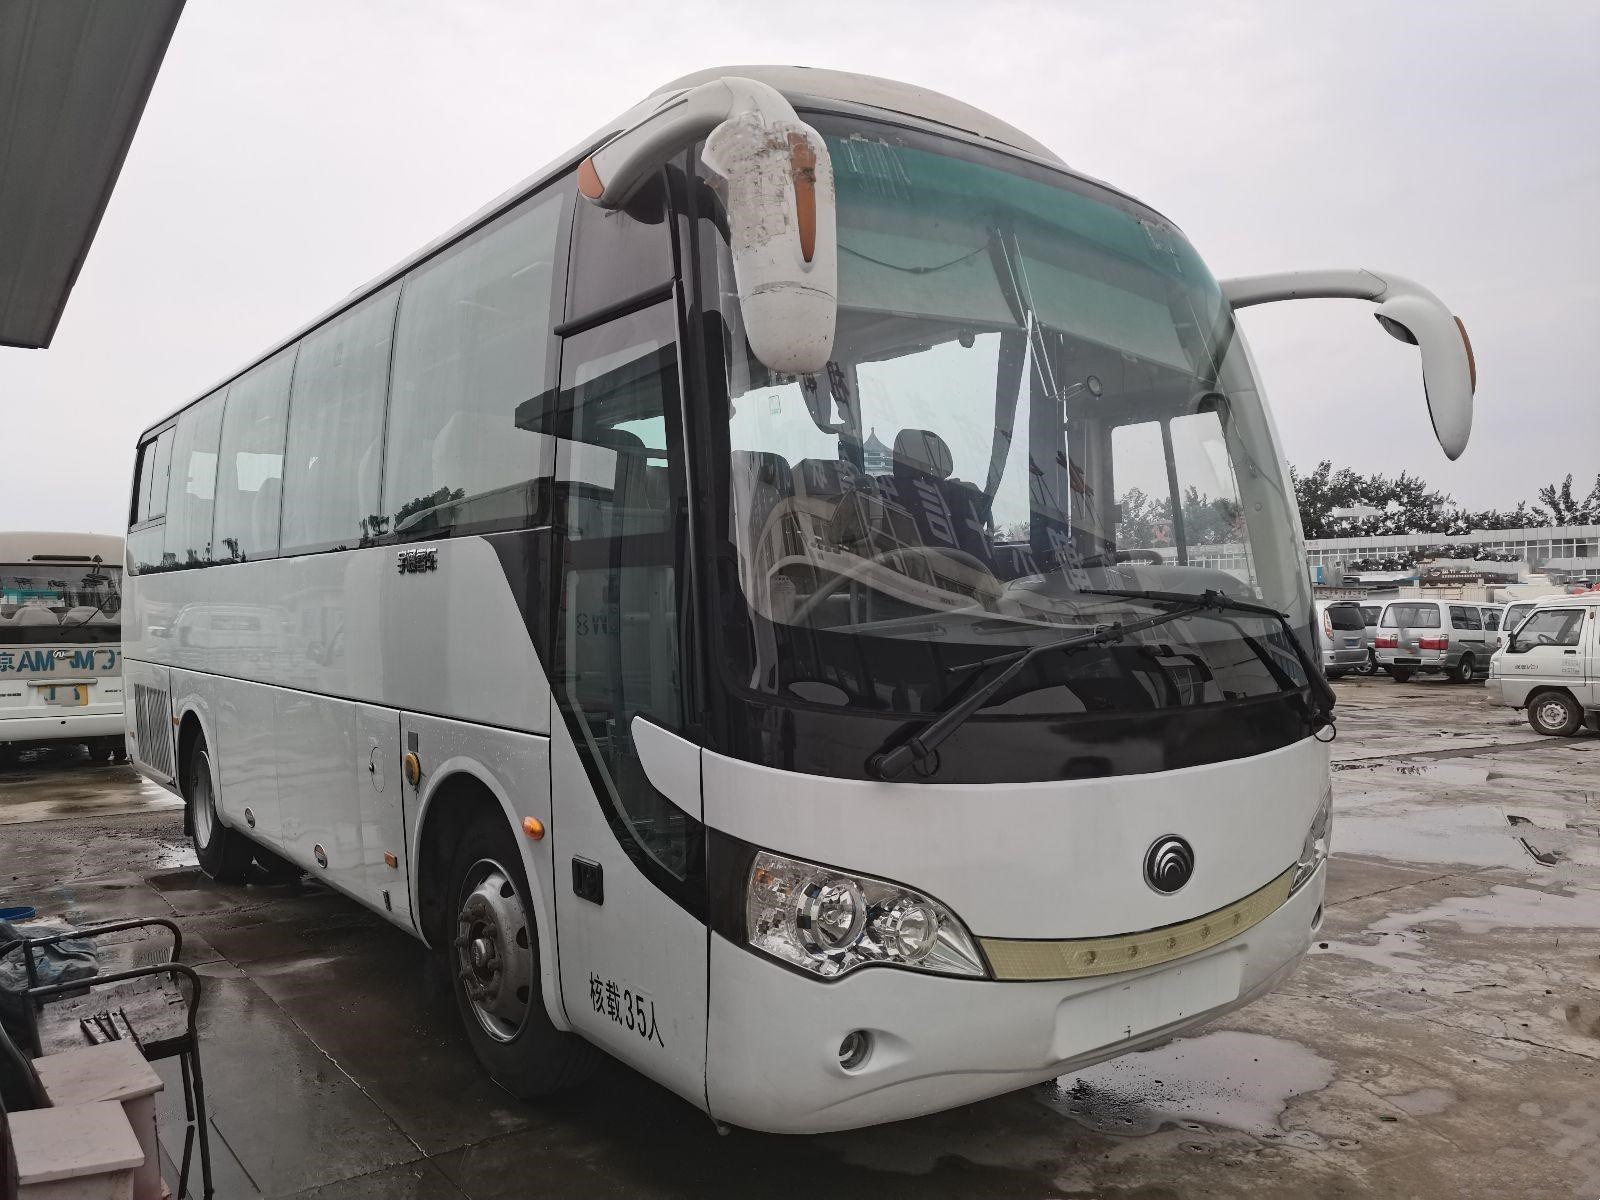 YUTONG Bus 35 Seats Second Hand Diesel Fuel ZK6107 Coach Used Bus Export Used Coach Bus